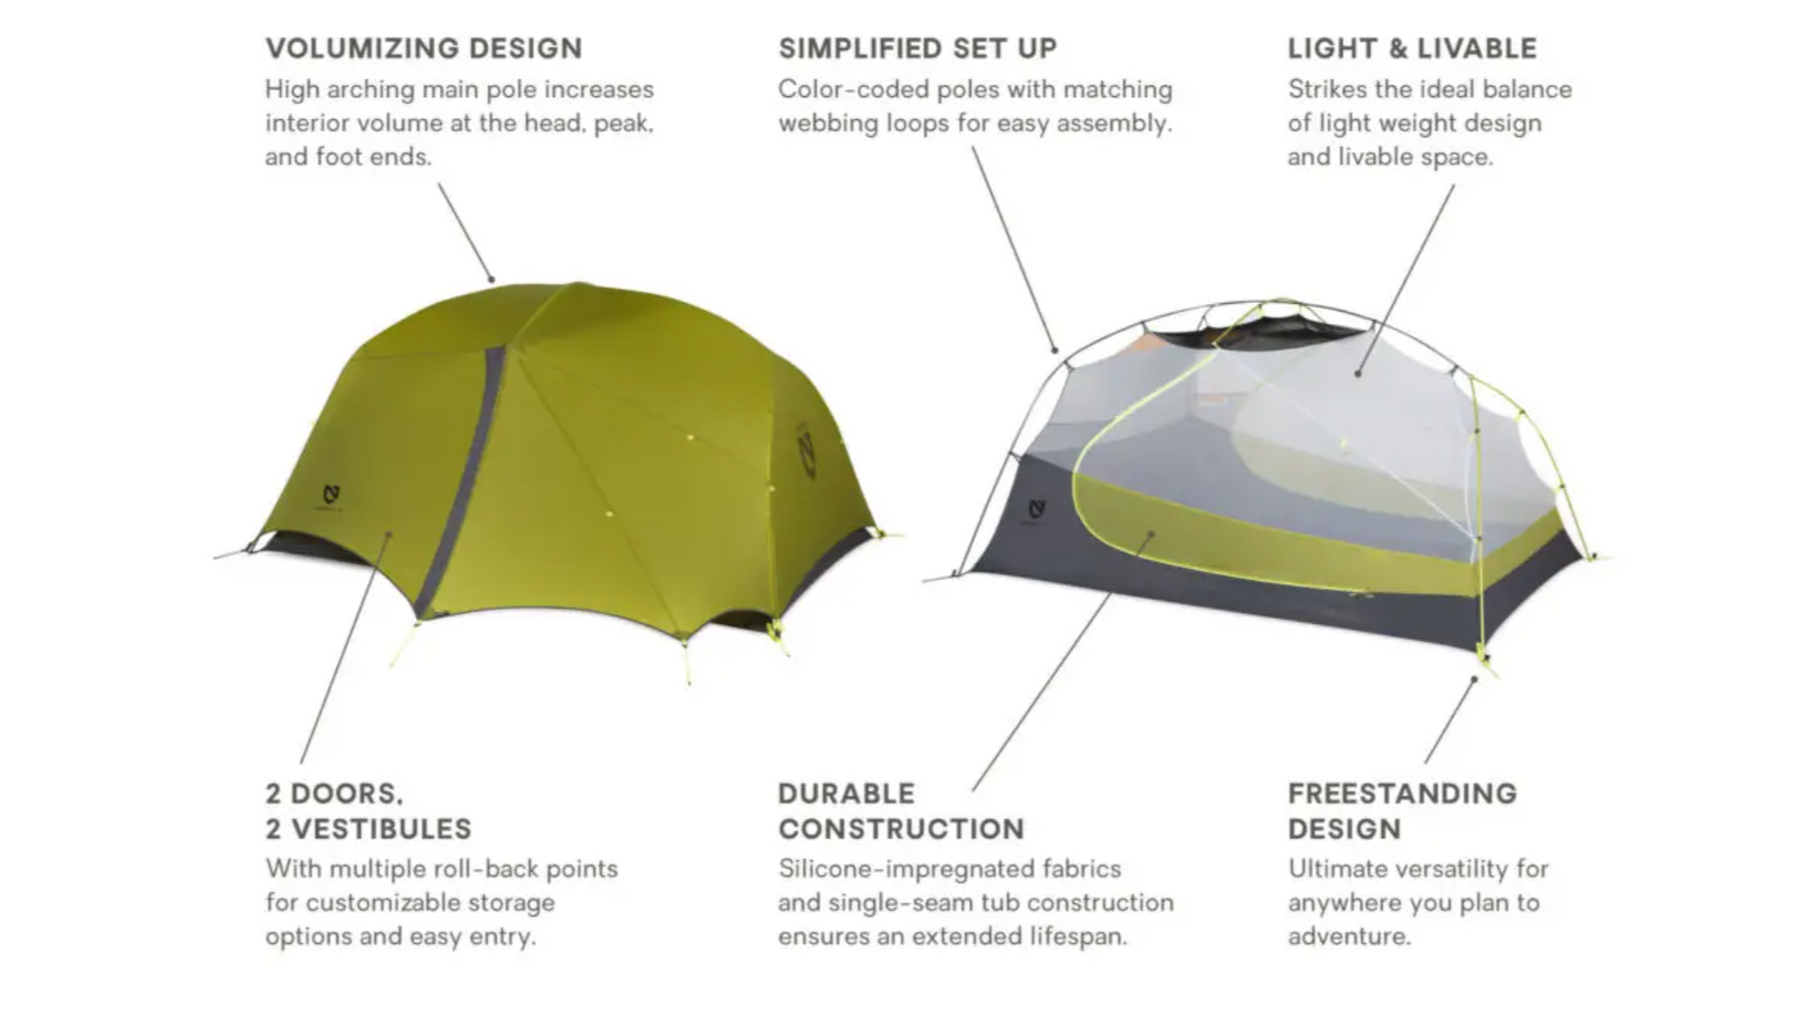 Dragonfly™ Ultralight Backpacking Tent